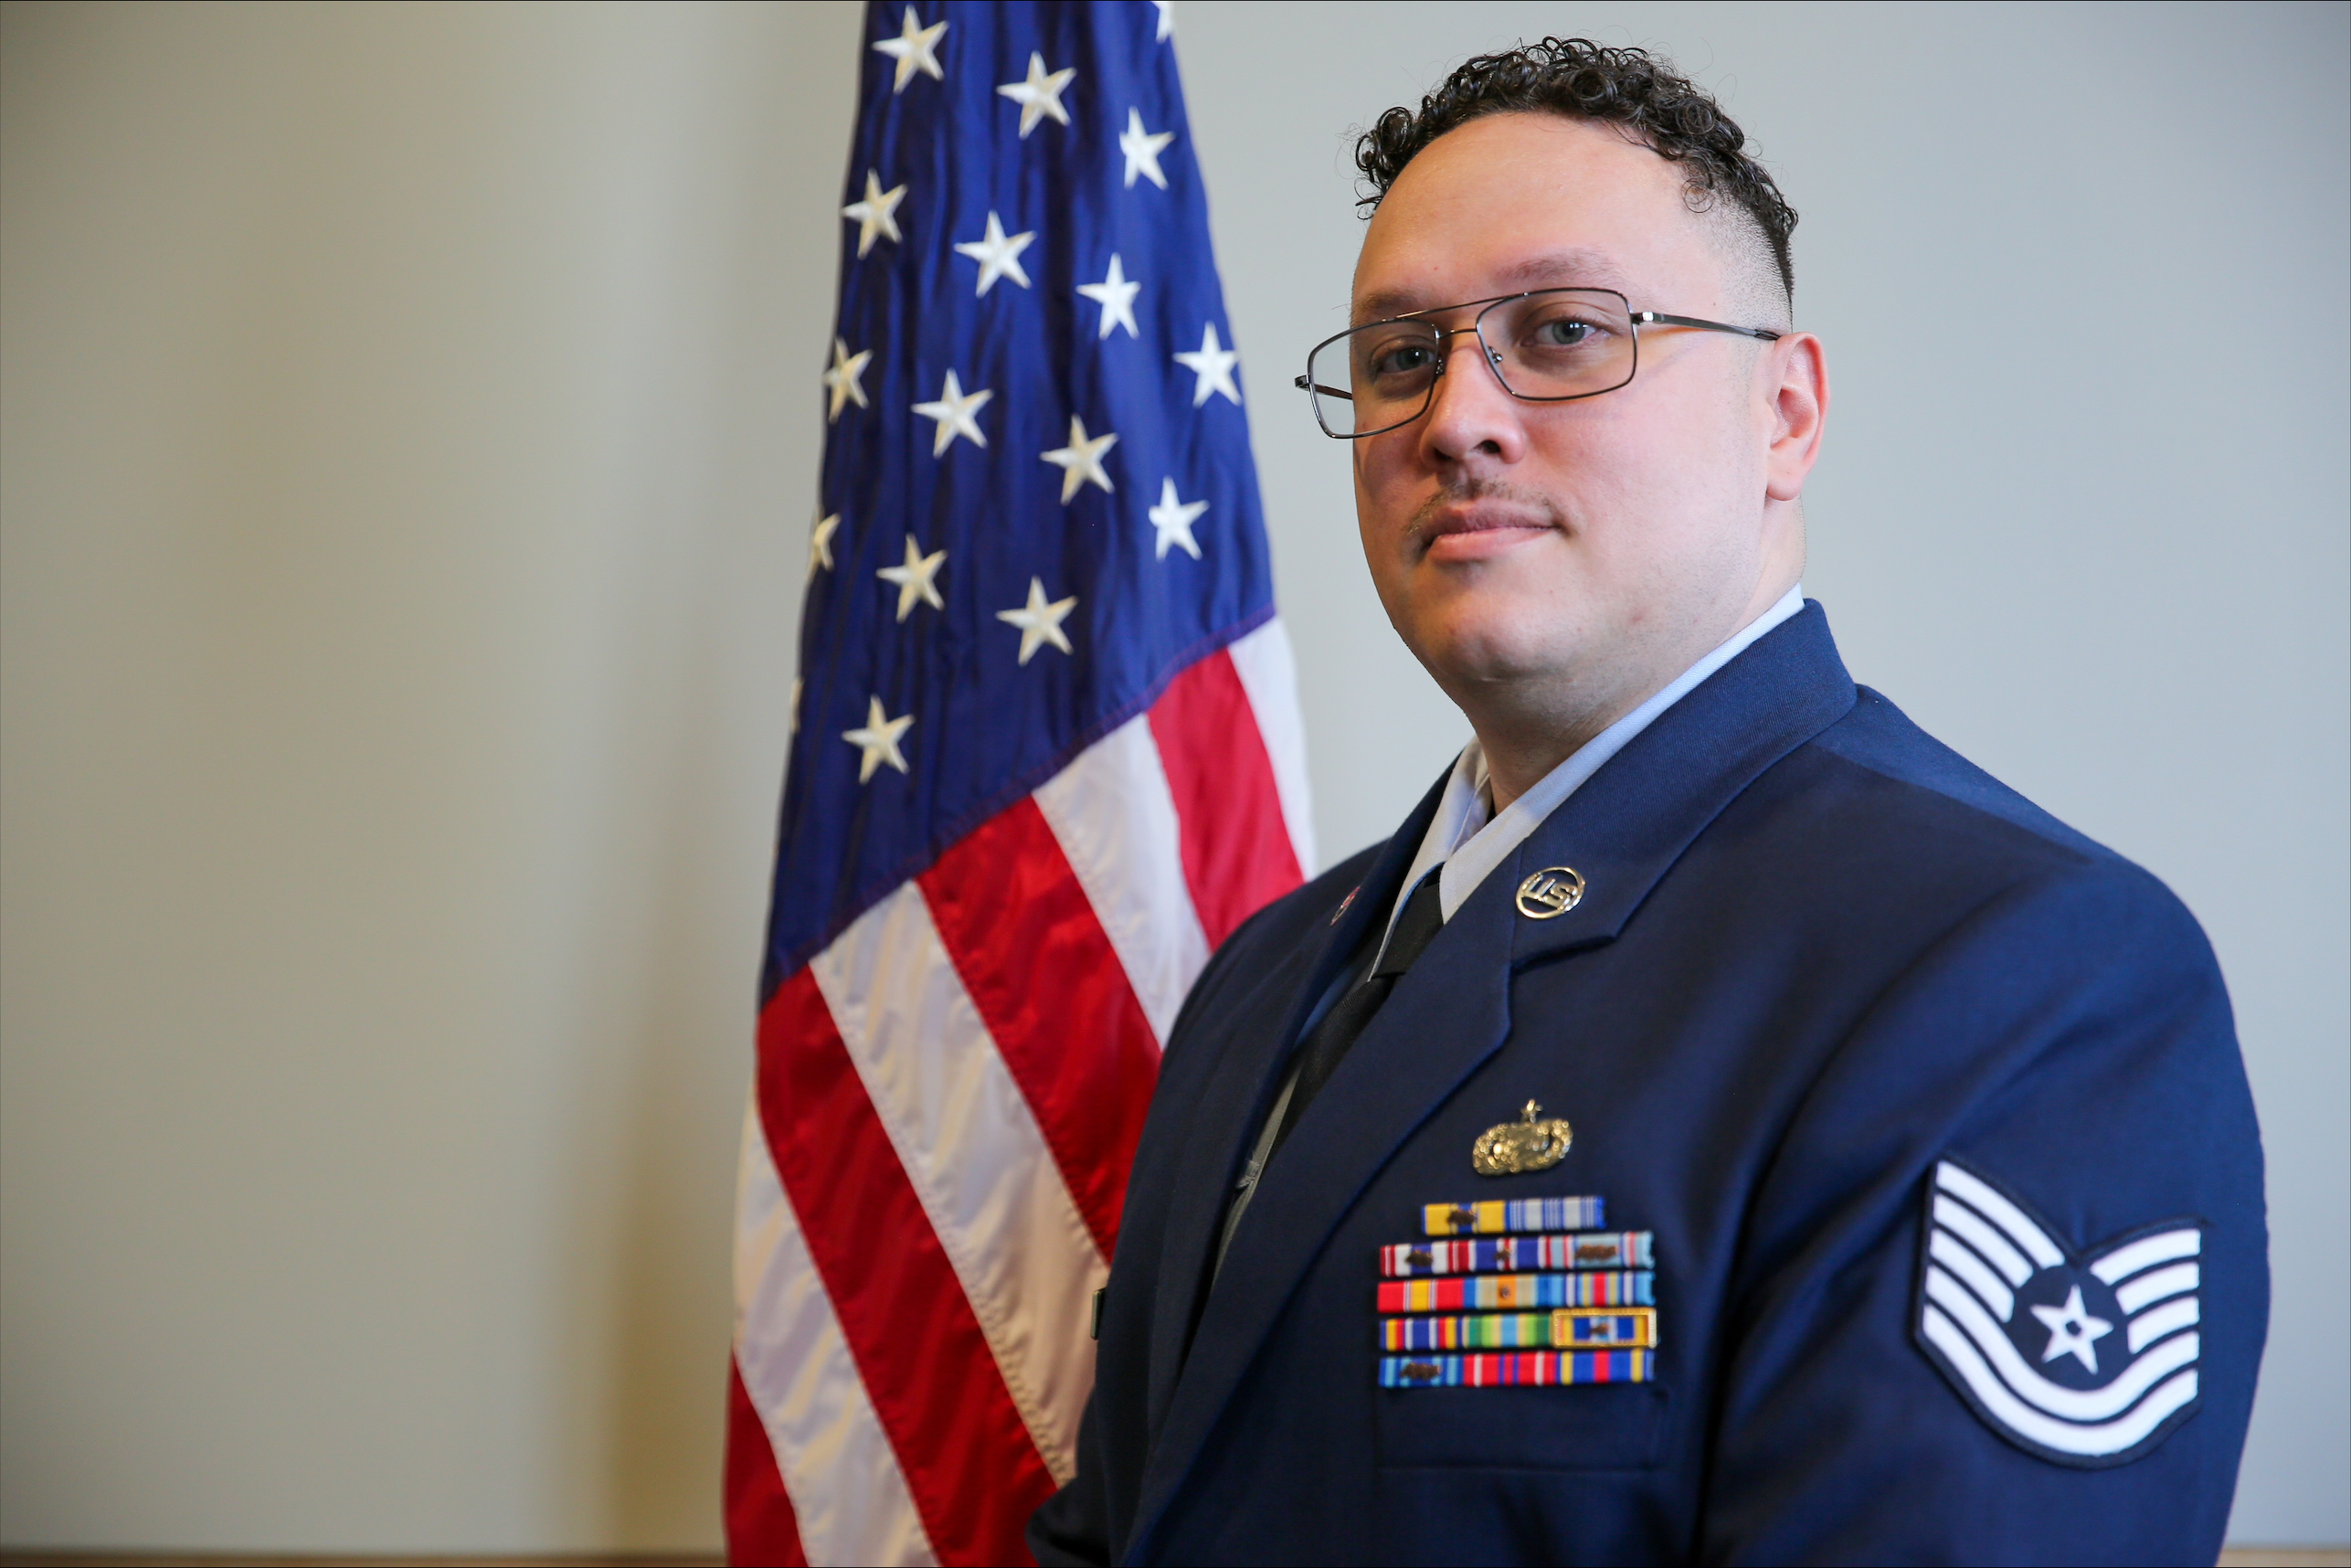 Official Photo of Technical Sergeant Batista